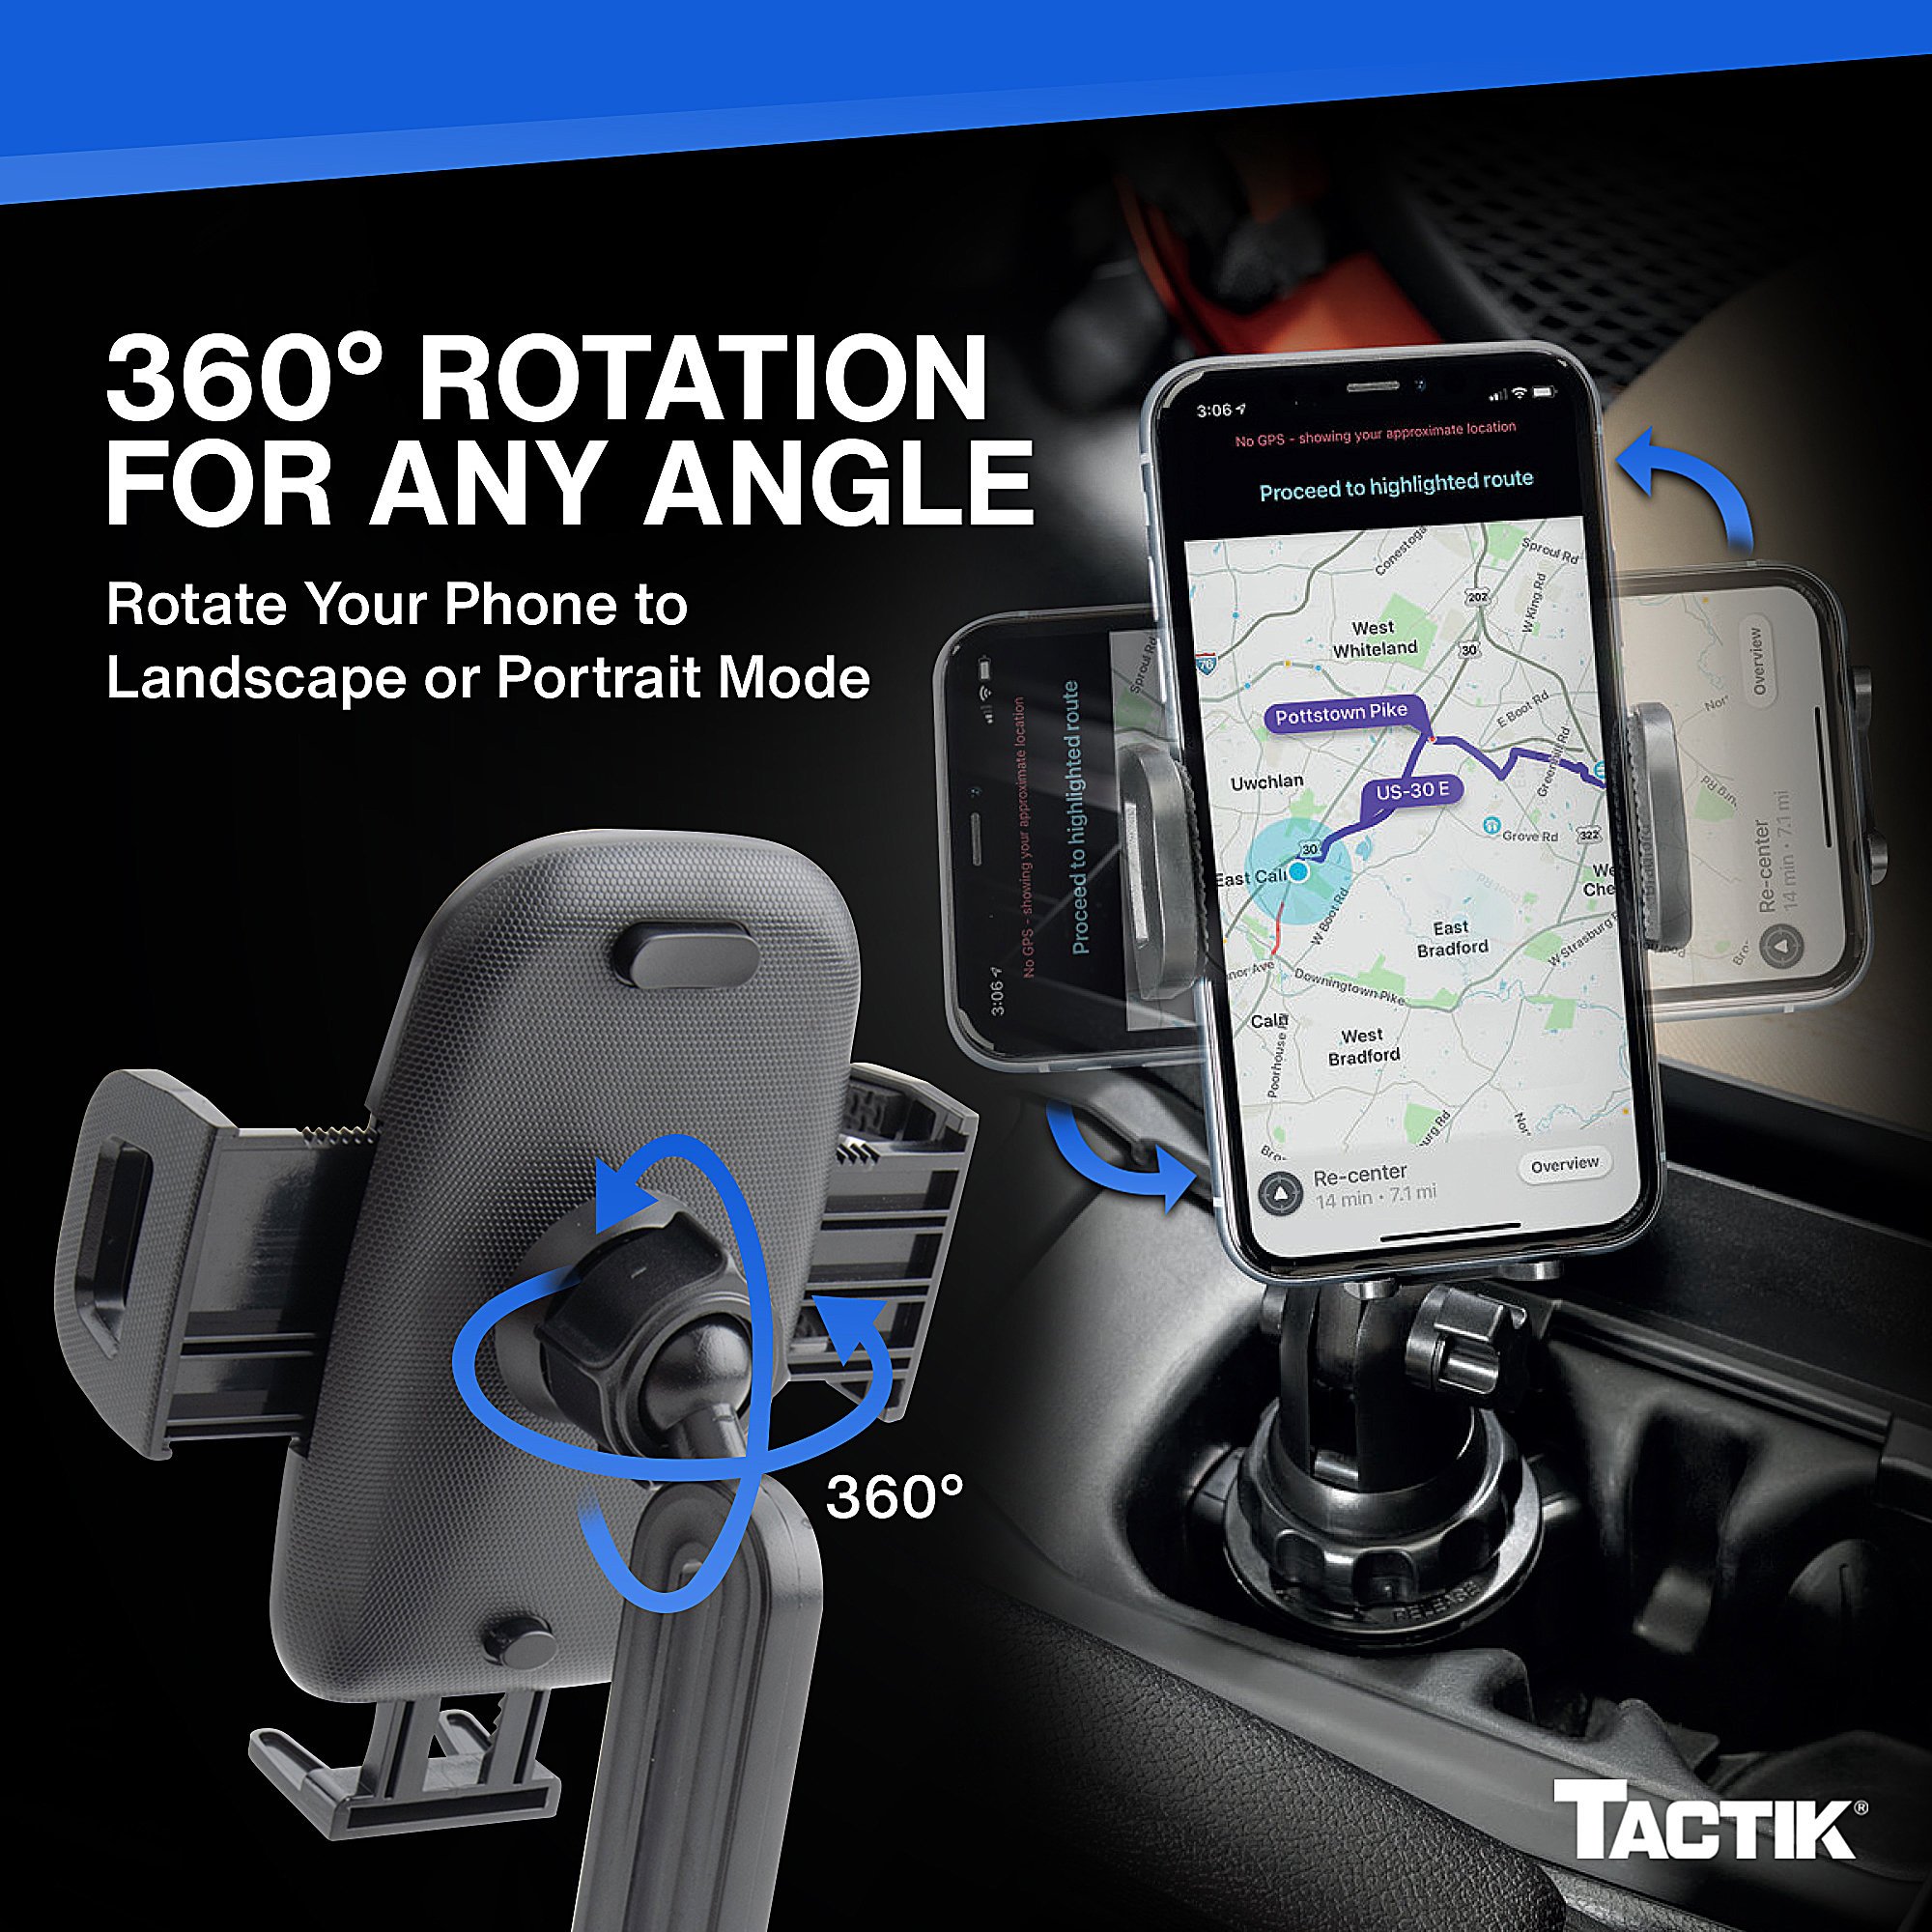 https://www.quadratec.com/sites/default/files/styles/product_zoomed/public/product_images/quadratec-cup-holder-cell-phone-mount-94011-3100-tabletop-rotation.jpg